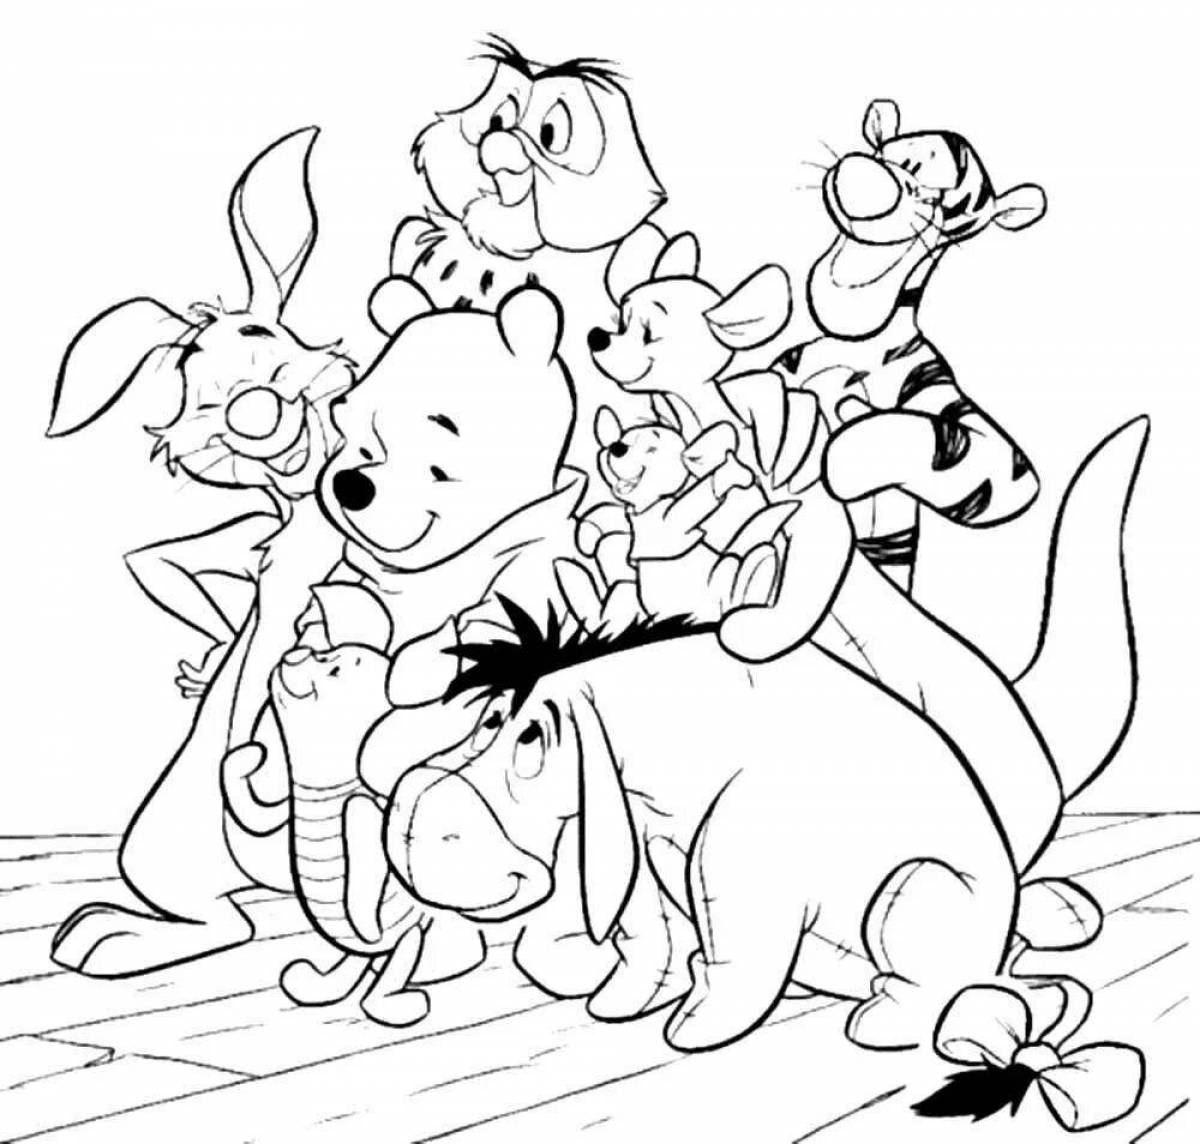 Coloring book with playful cartoon characters for children 6-7 years old